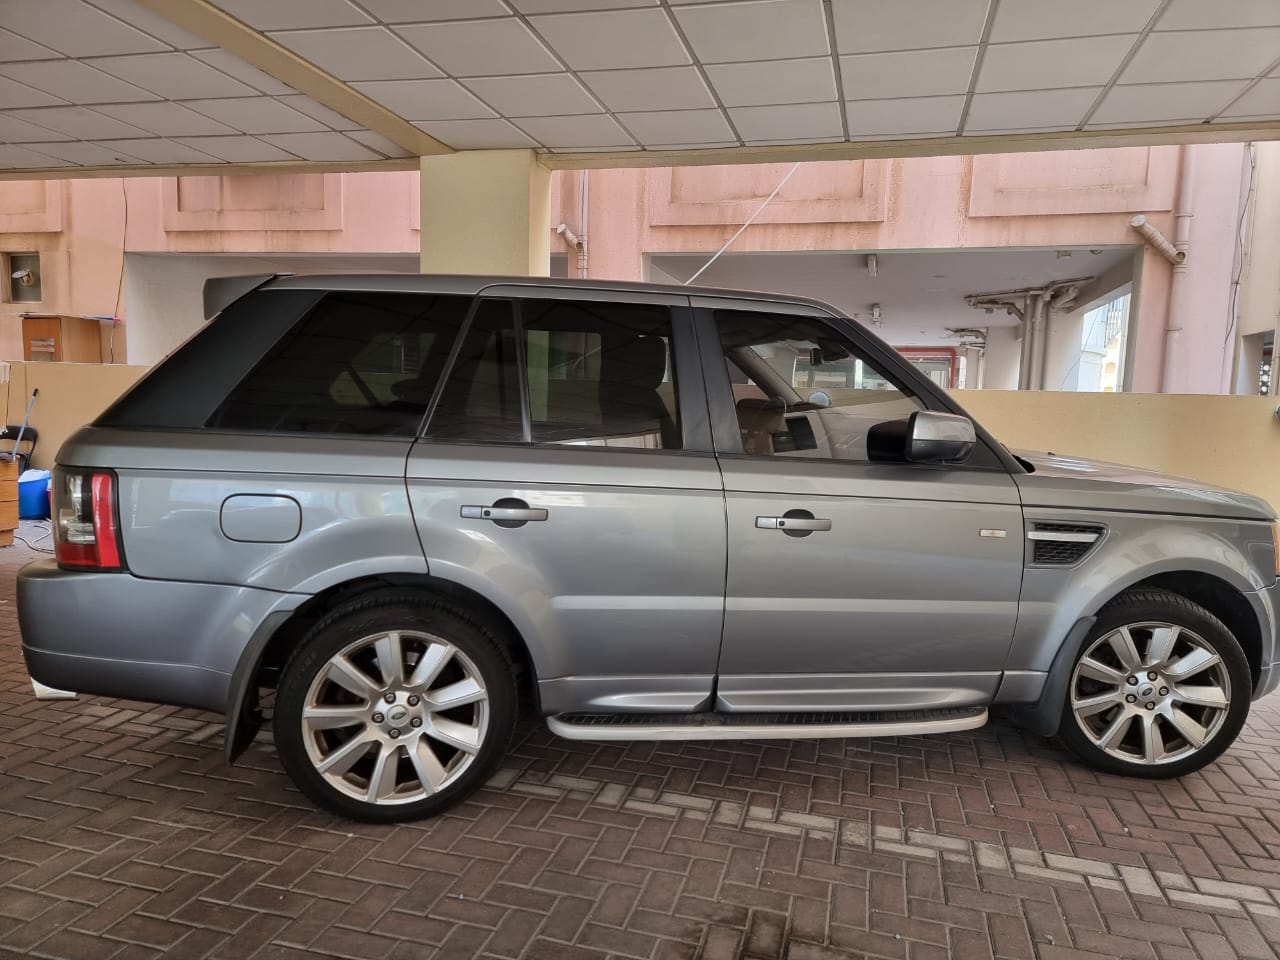 RANGE ROVER SPORTS FOR SALE